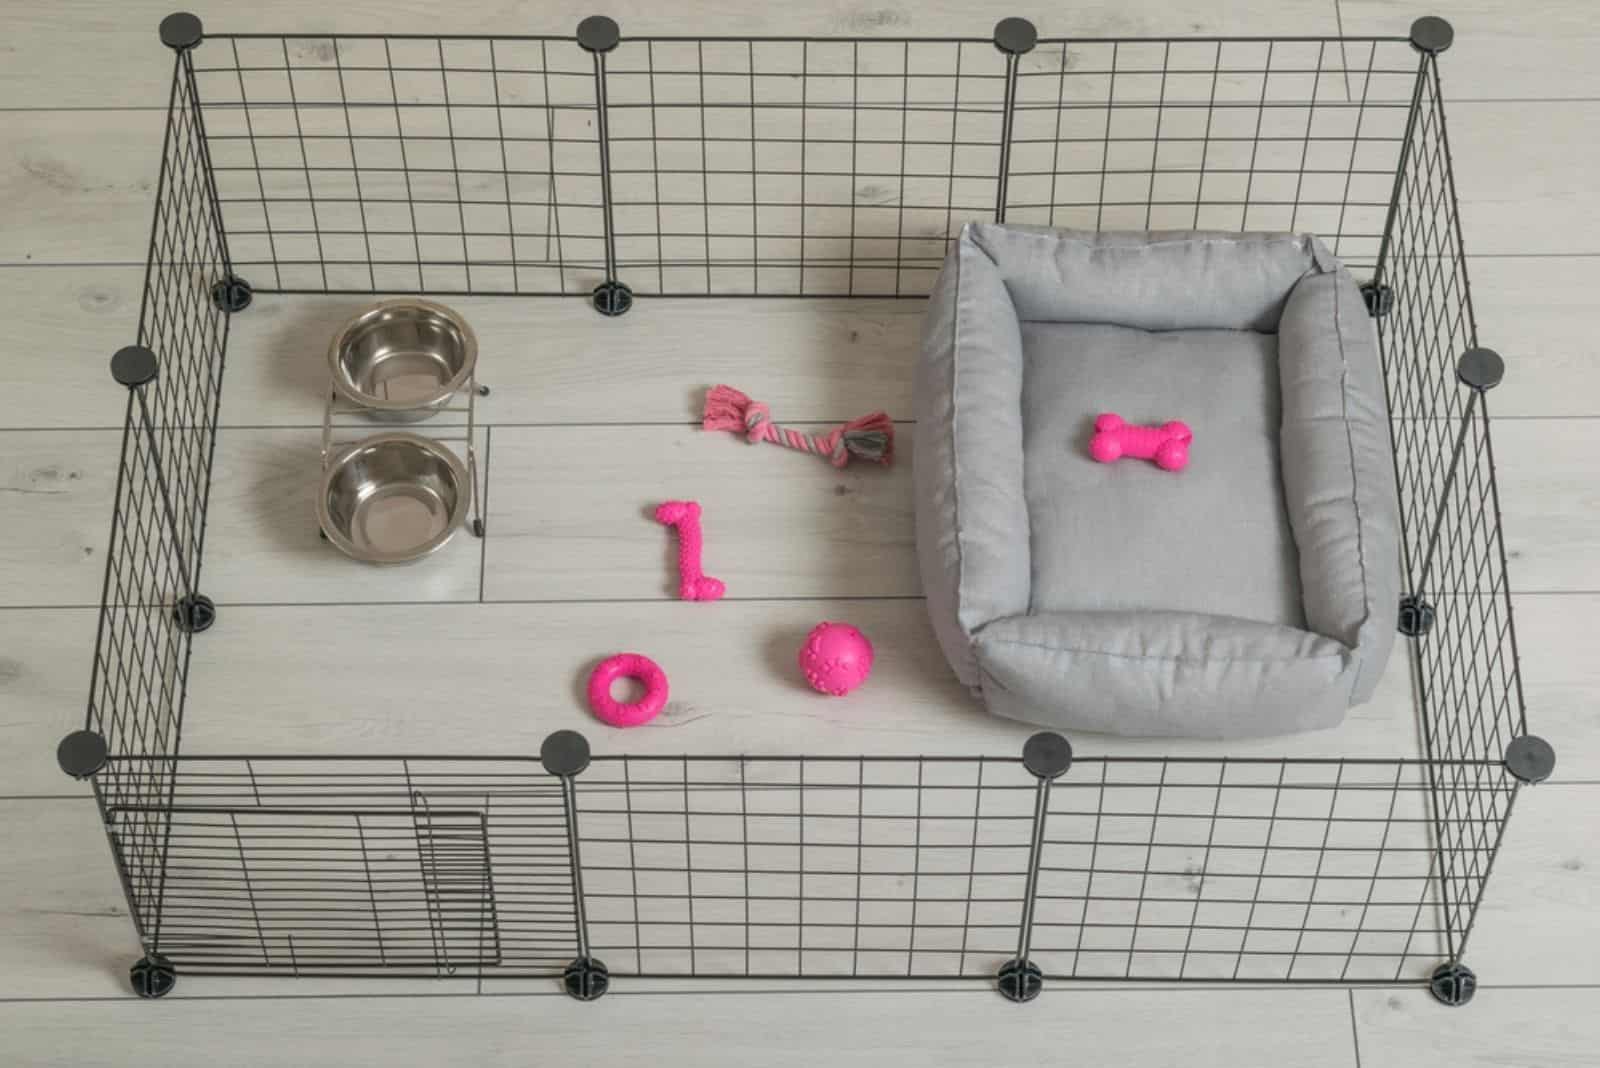 A home aviary for a dog with toys, a bowl and a bed